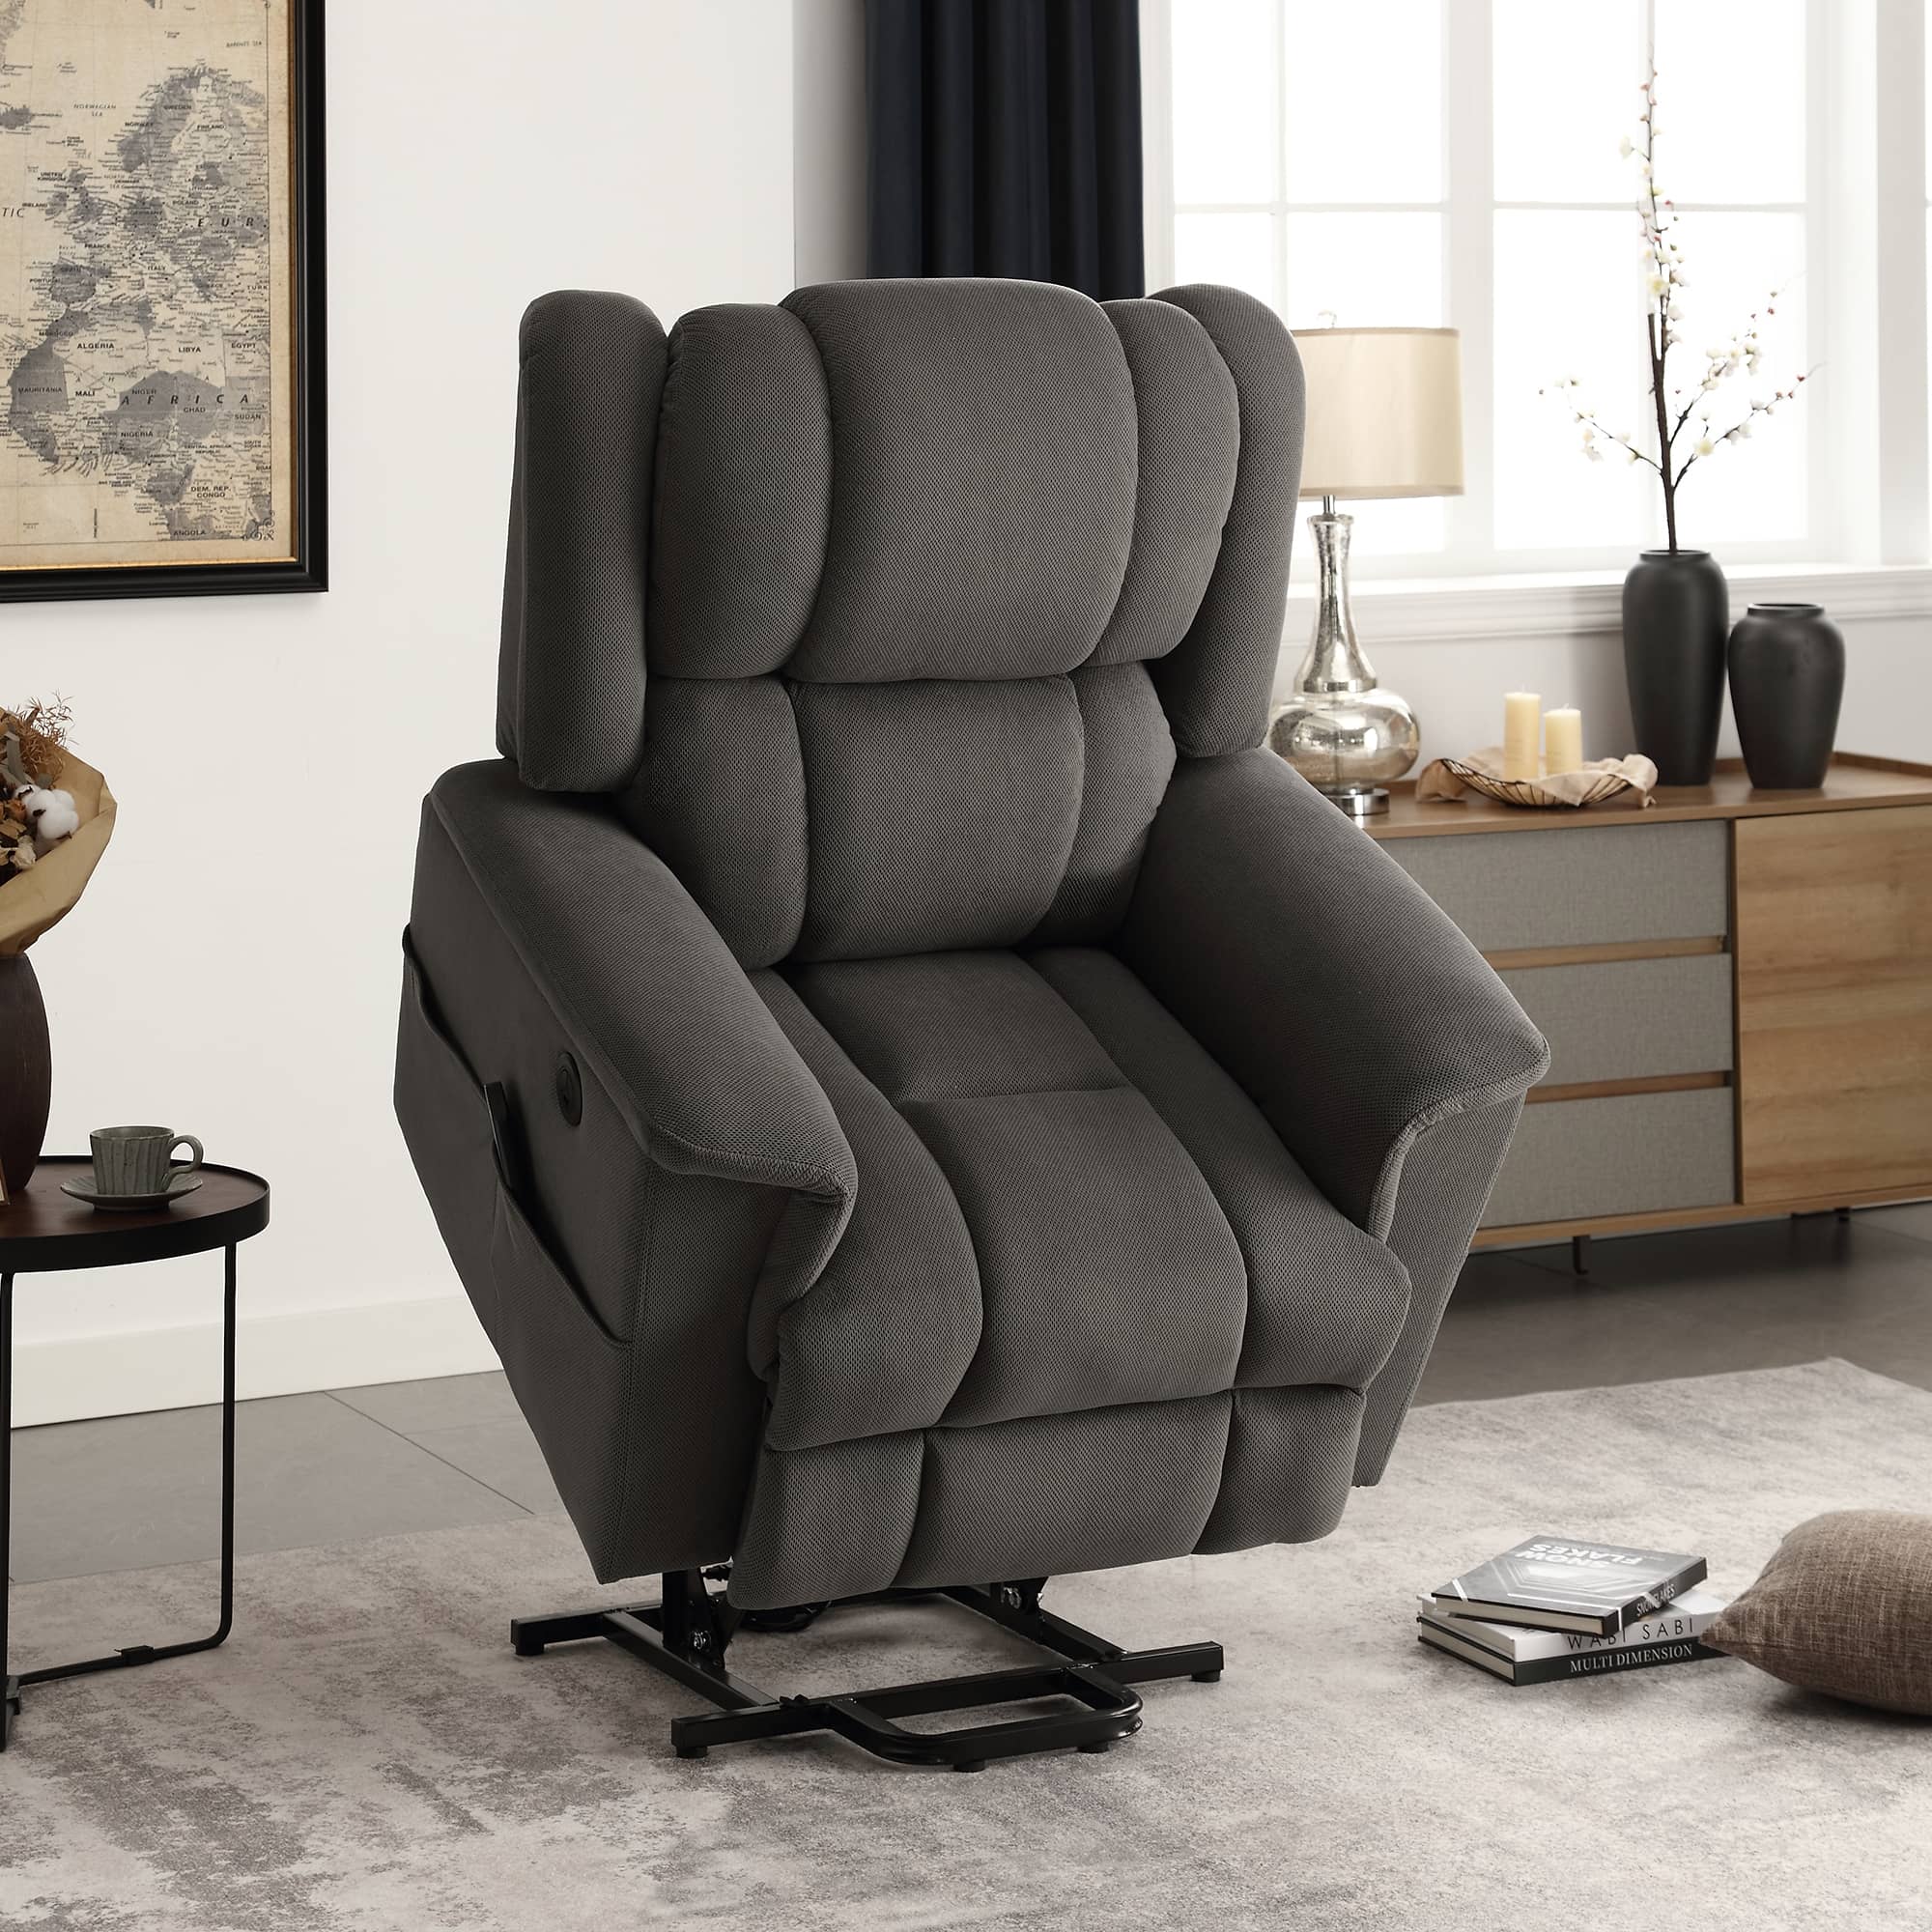 Infinite Position Power Lift Recliner with Heat and Massage, Dark Gray